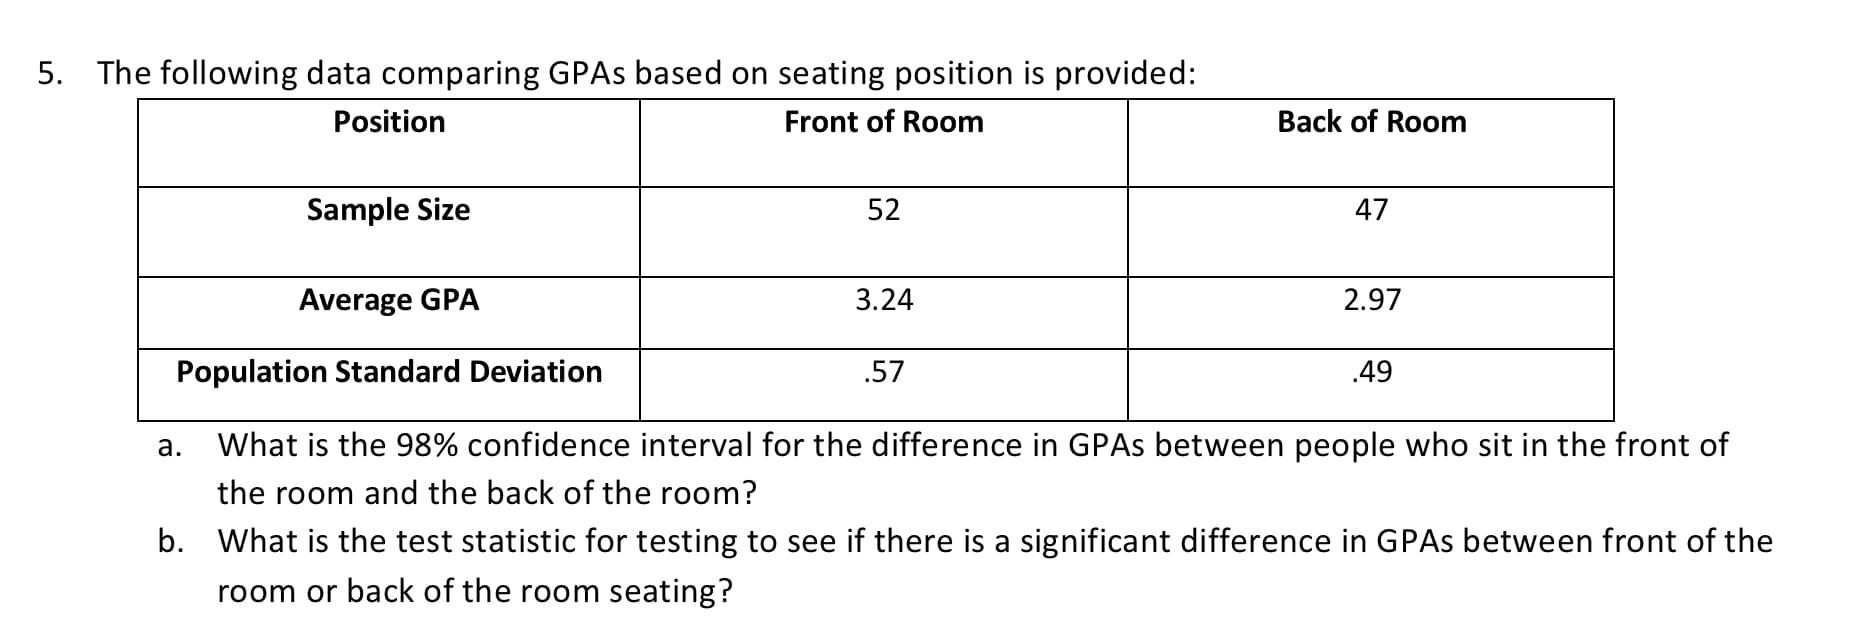 5. The following data comparing GPAS based on seating position is provided:
Position
Front of Room
Back of Room
Sample Size
52
47
Average GPA
3.24
2.97
Population Standard Deviation
.57
.49
а.
What is the 98% confidence interval for the difference in GPAS between people who sit in the front of
the room and the back of the room?
b. What is the test statistic for testing to see if there is a significant difference in GPAS between front of the
room or back of the room seating?
